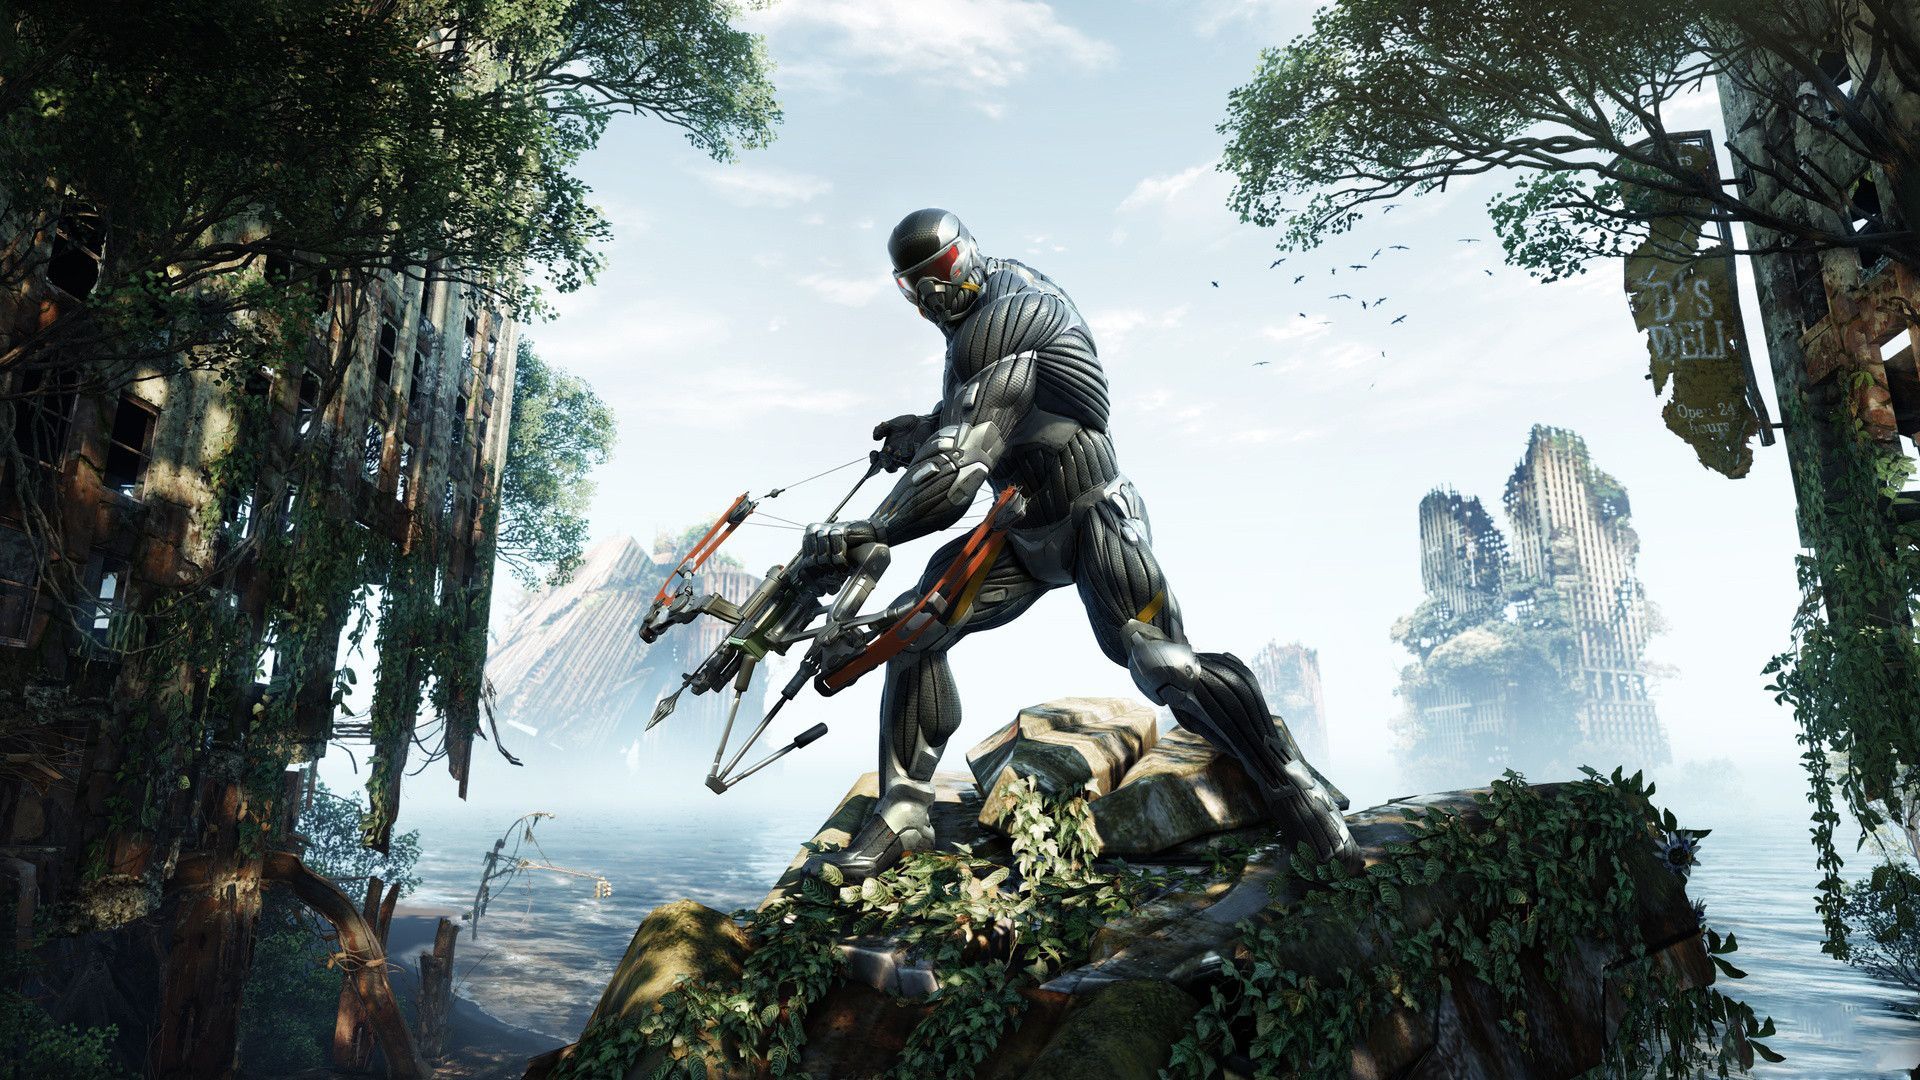 Gallery for - crysis gamewallpapers